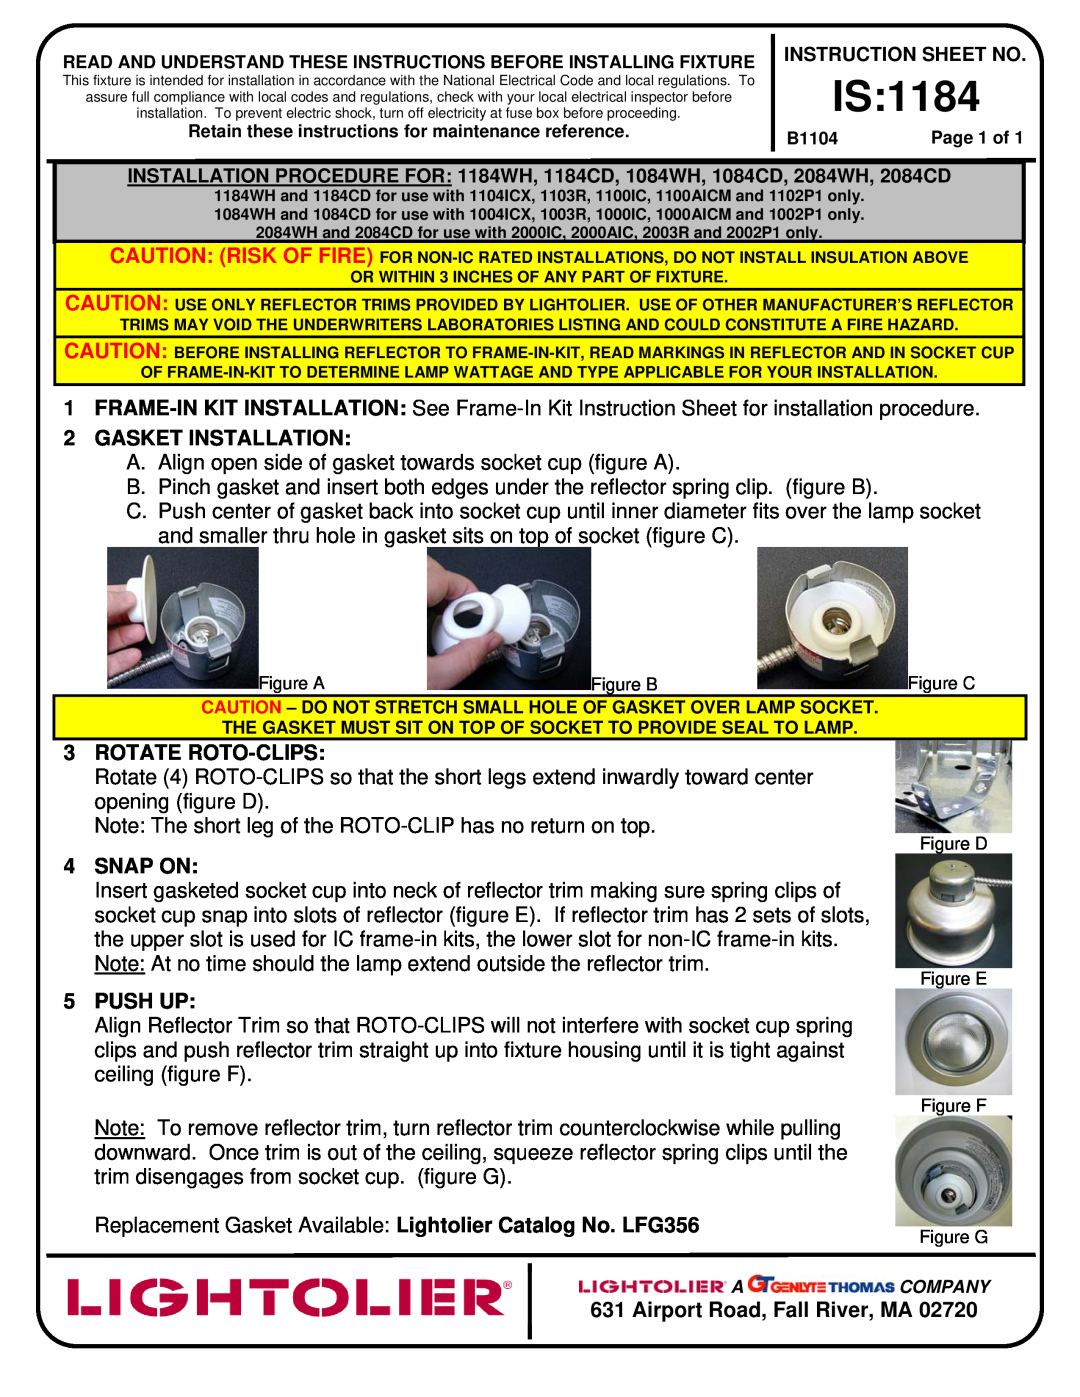 Lightolier 1184WH, 1184CD, 2084WH instruction sheet 2GASKET INSTALLATION, 3ROTATE ROTO-CLIPS, Snap On, 5PUSH UP, Is 